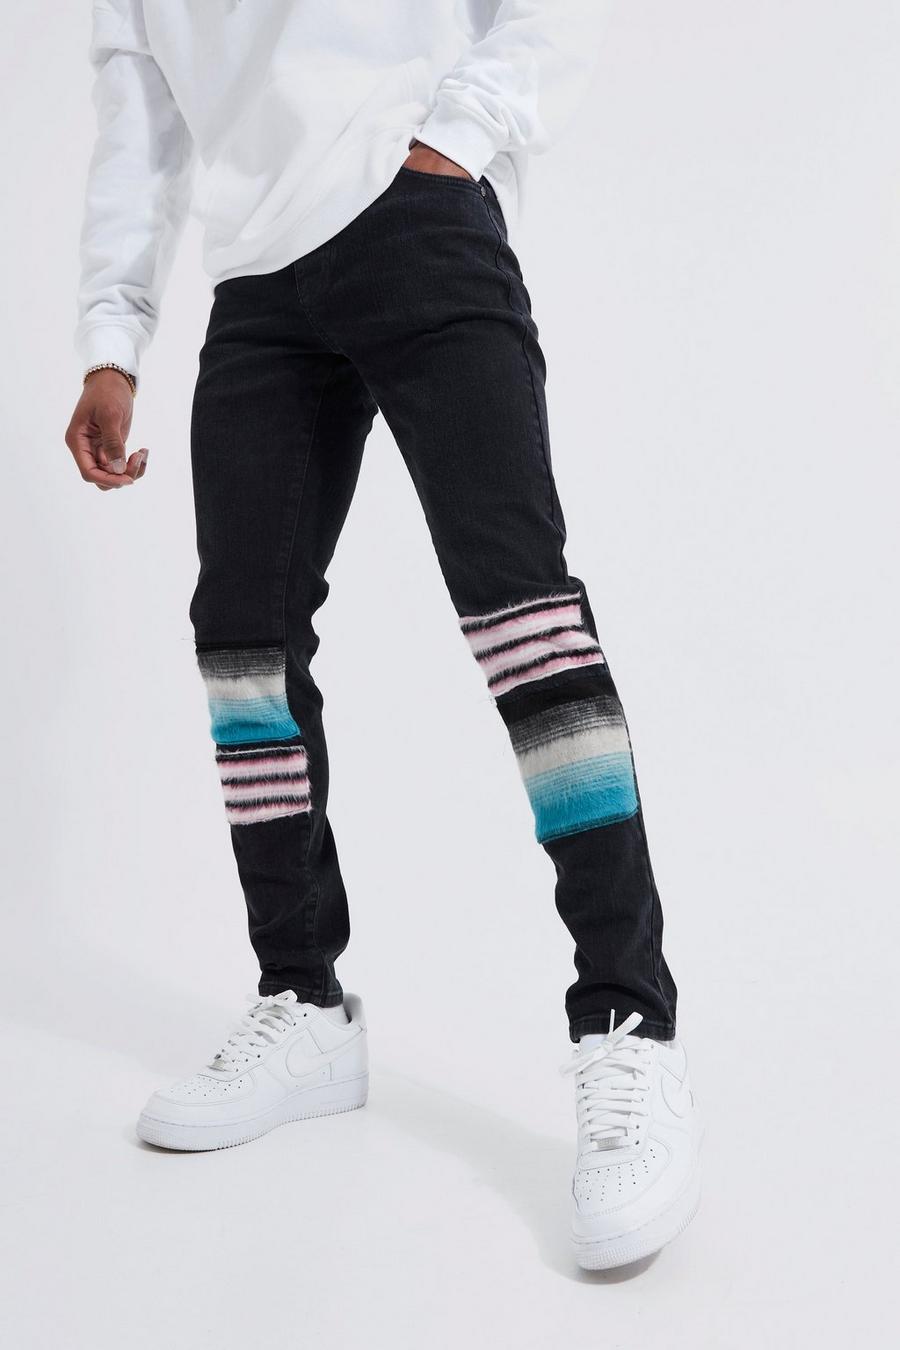 Jeans Skinny Fit in denim Stretch spazzolato a effetto patchwork, Washed black